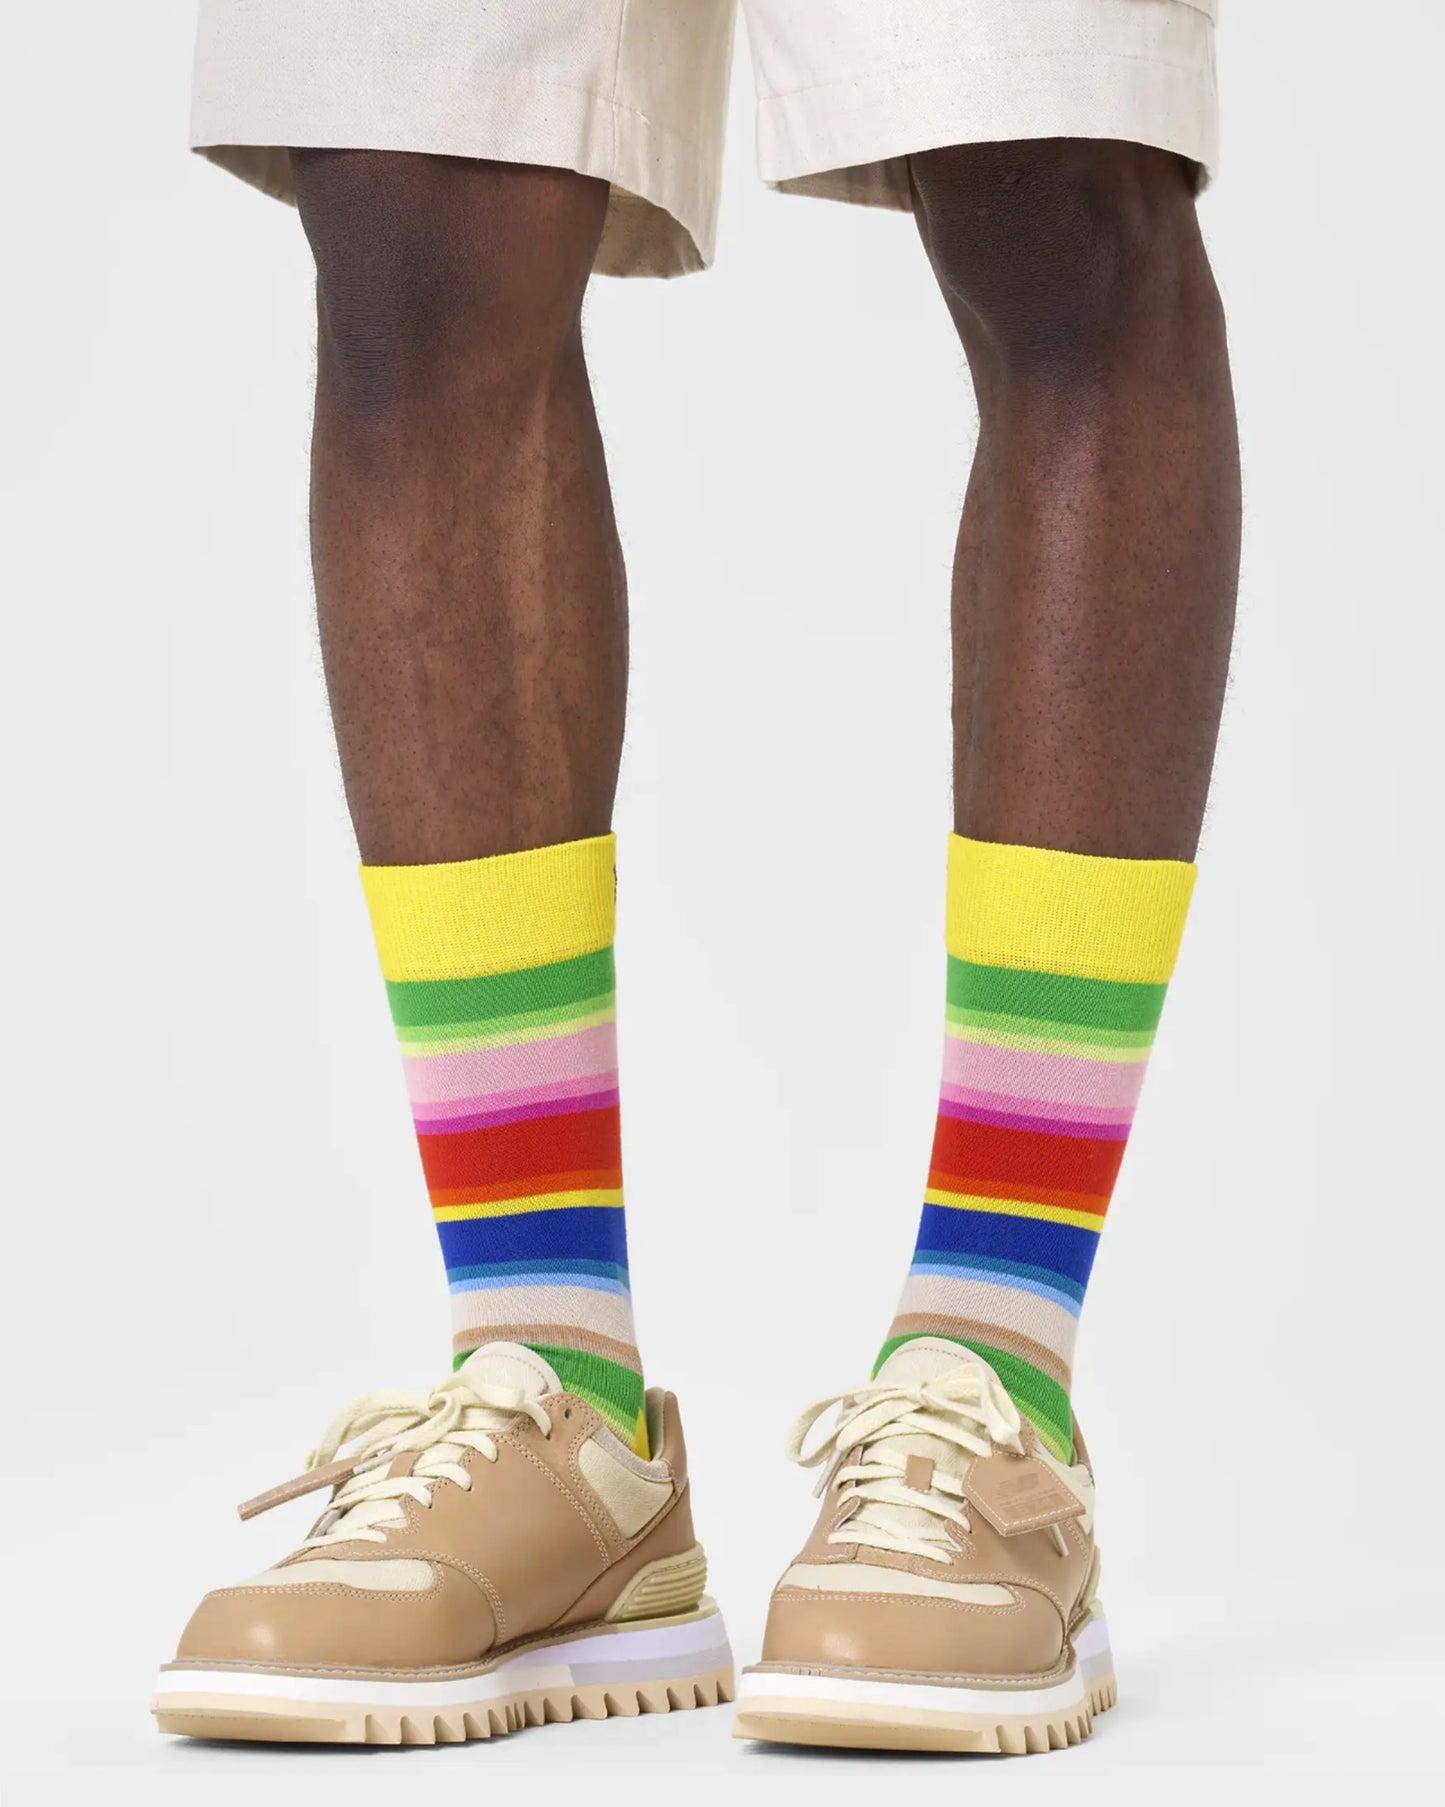 Happy Socks P000834 Gradient Sock - Bright yellow crew length ankle socks with a multicoloured horizontal rainbow stripe pattern. Worn with beige chino shorts and chunky soled tan and cream shoes.